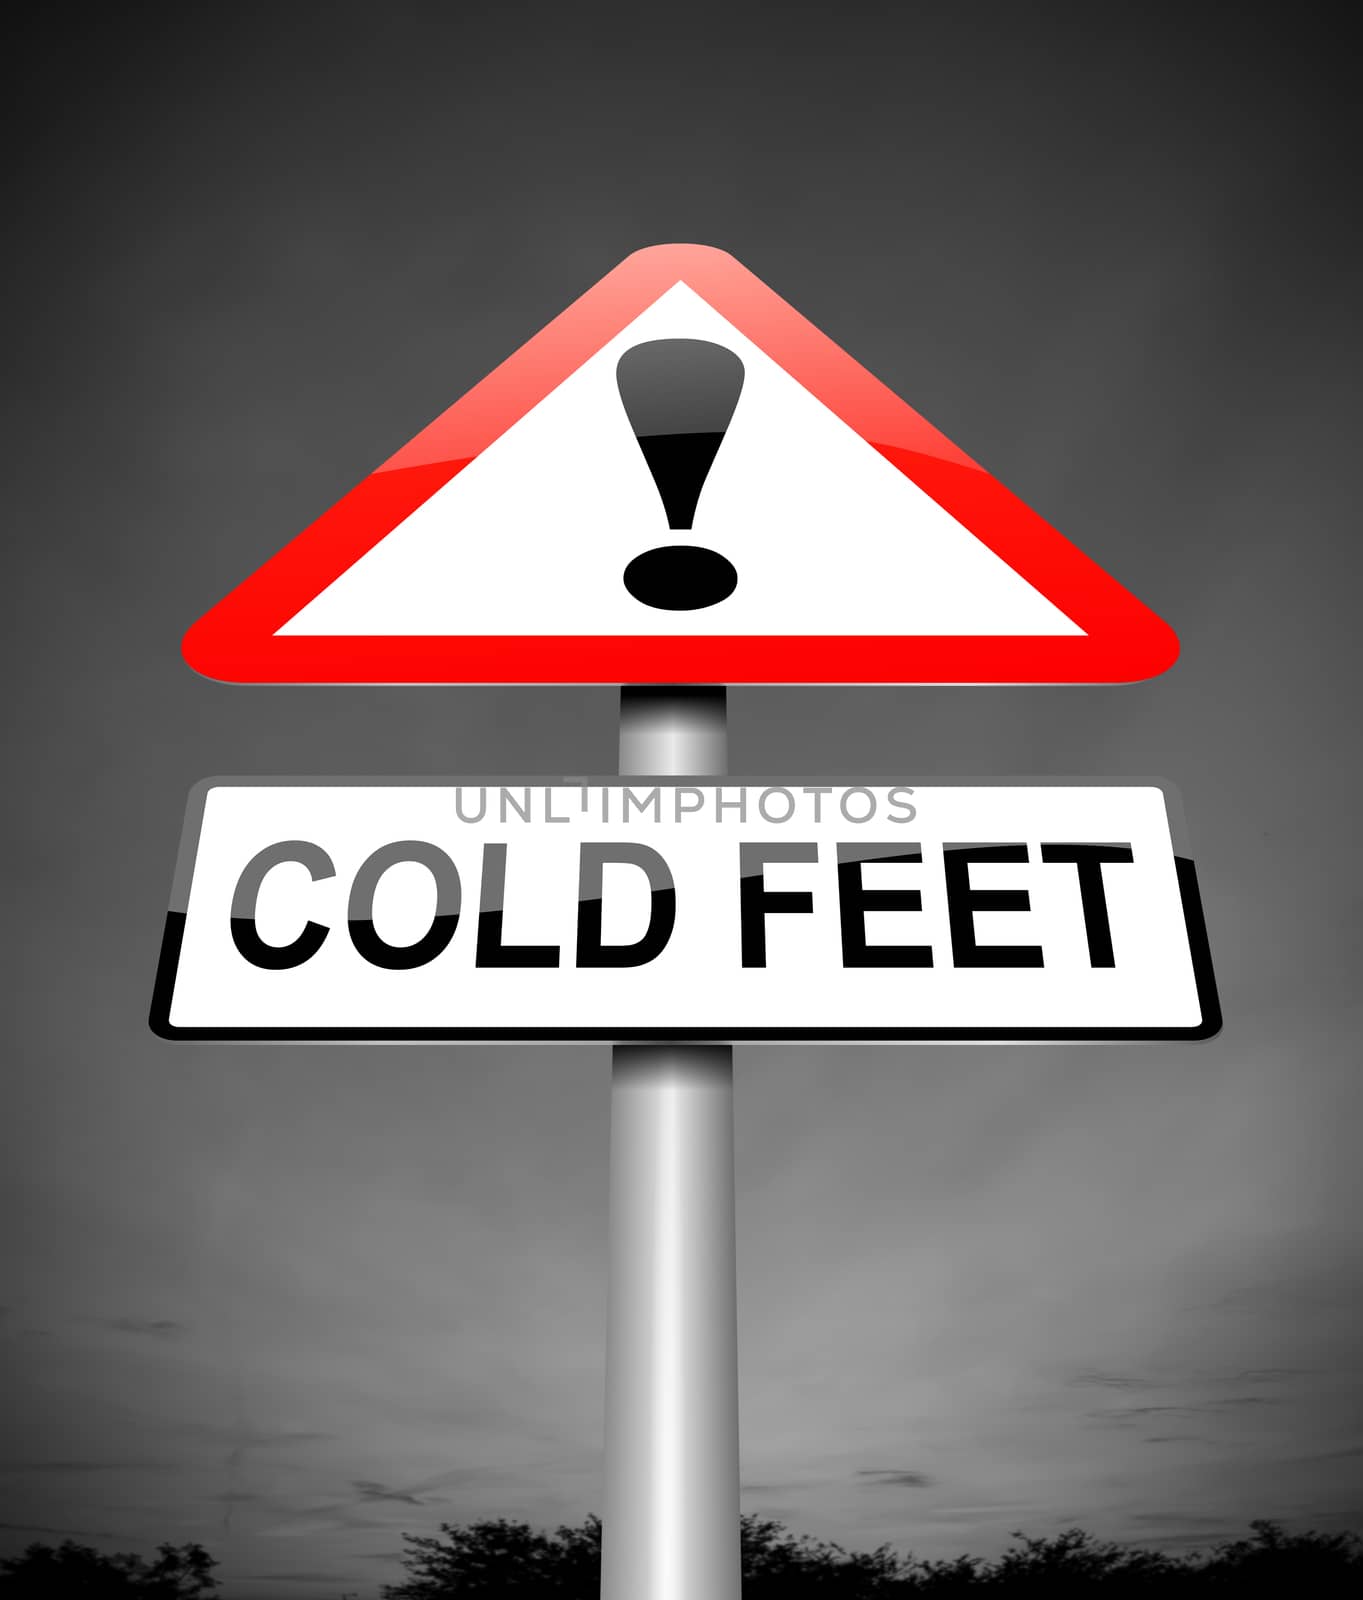 Illustration depicting a sign with a cold feet concept.